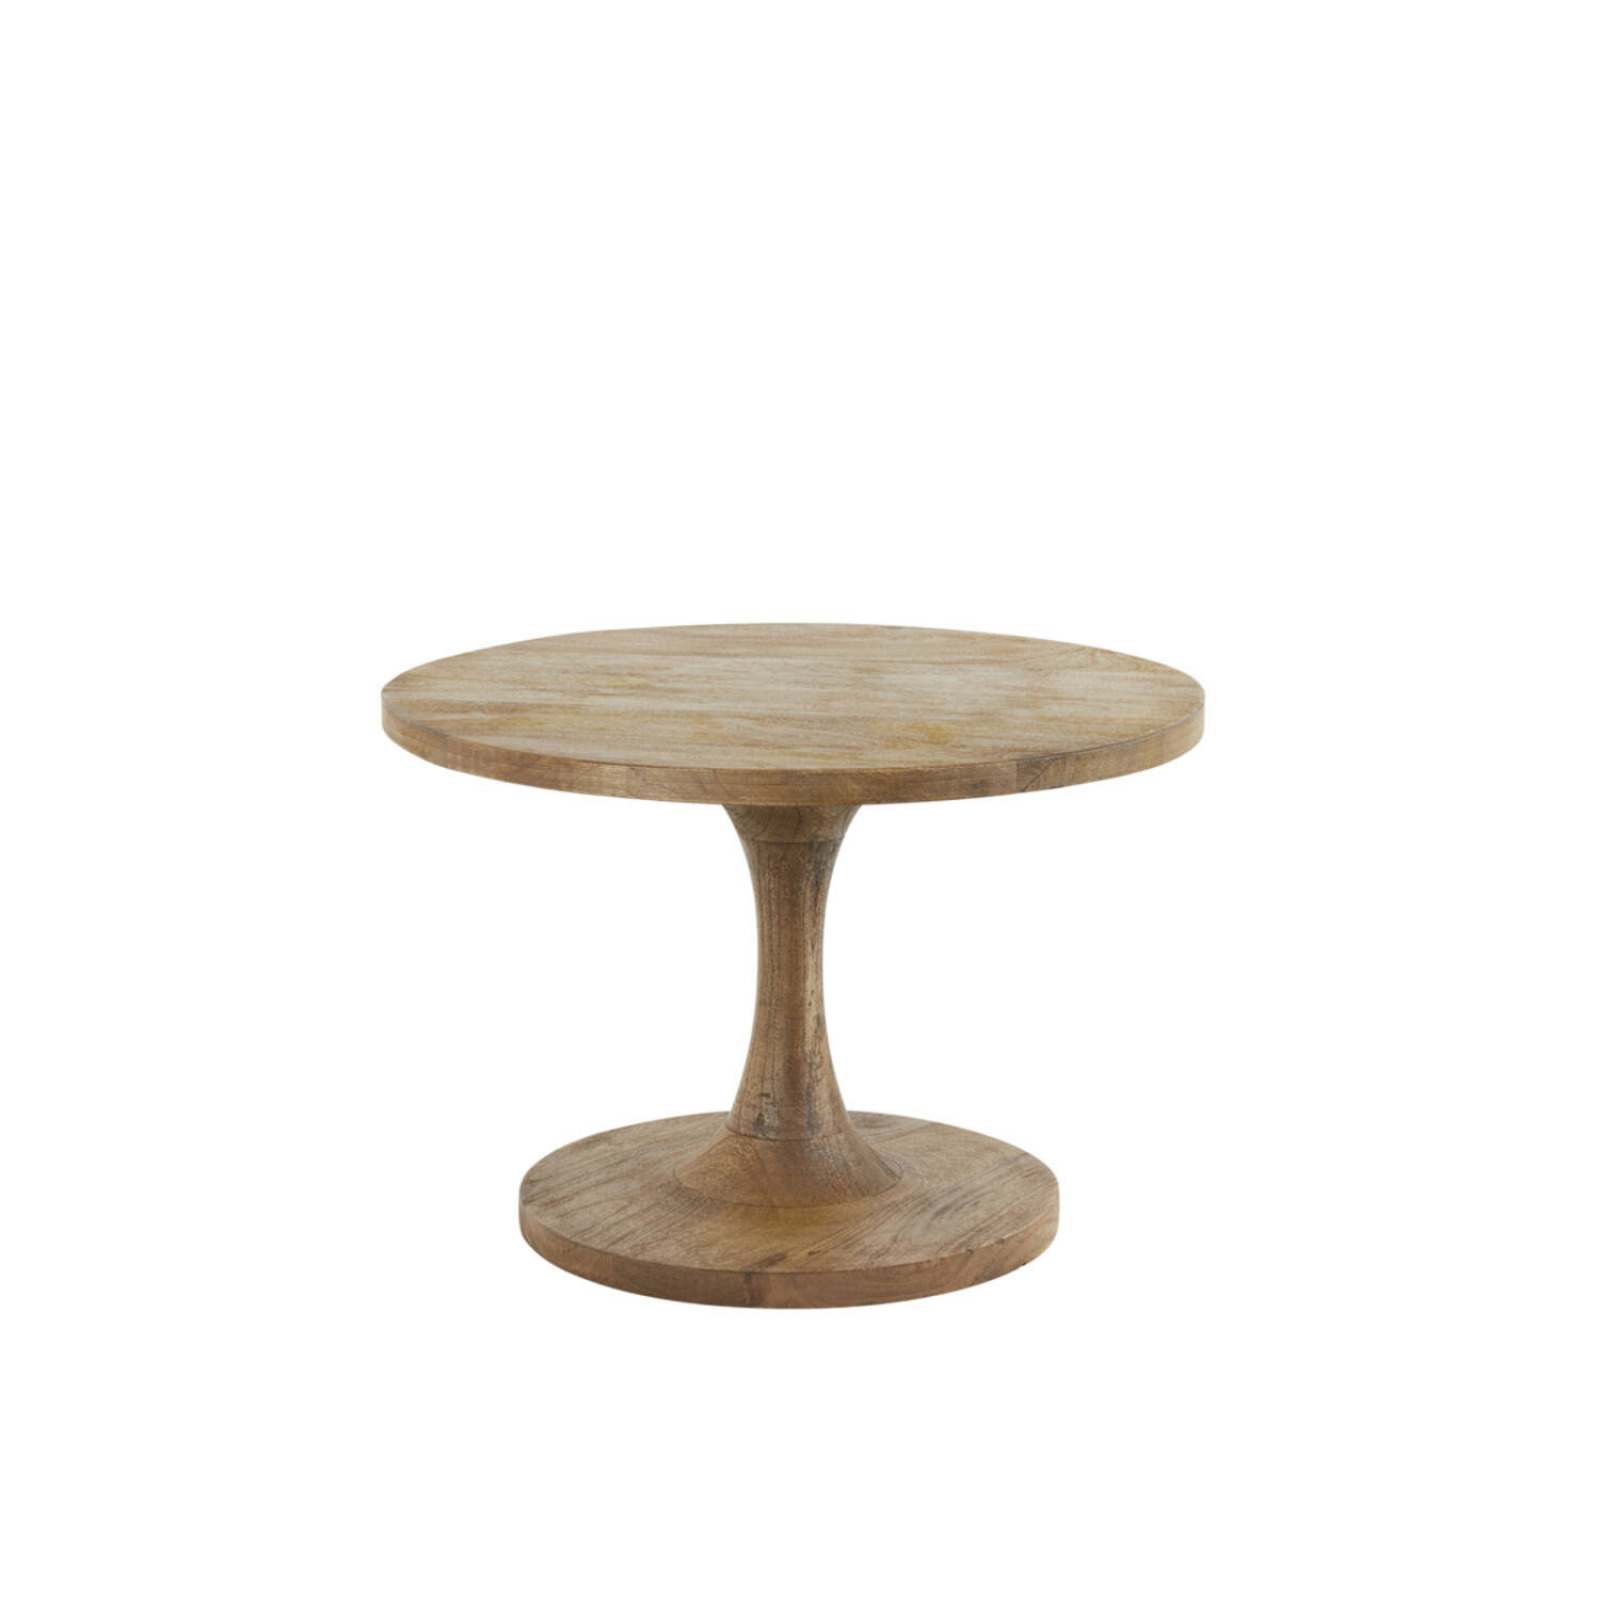 Bicaba side table S